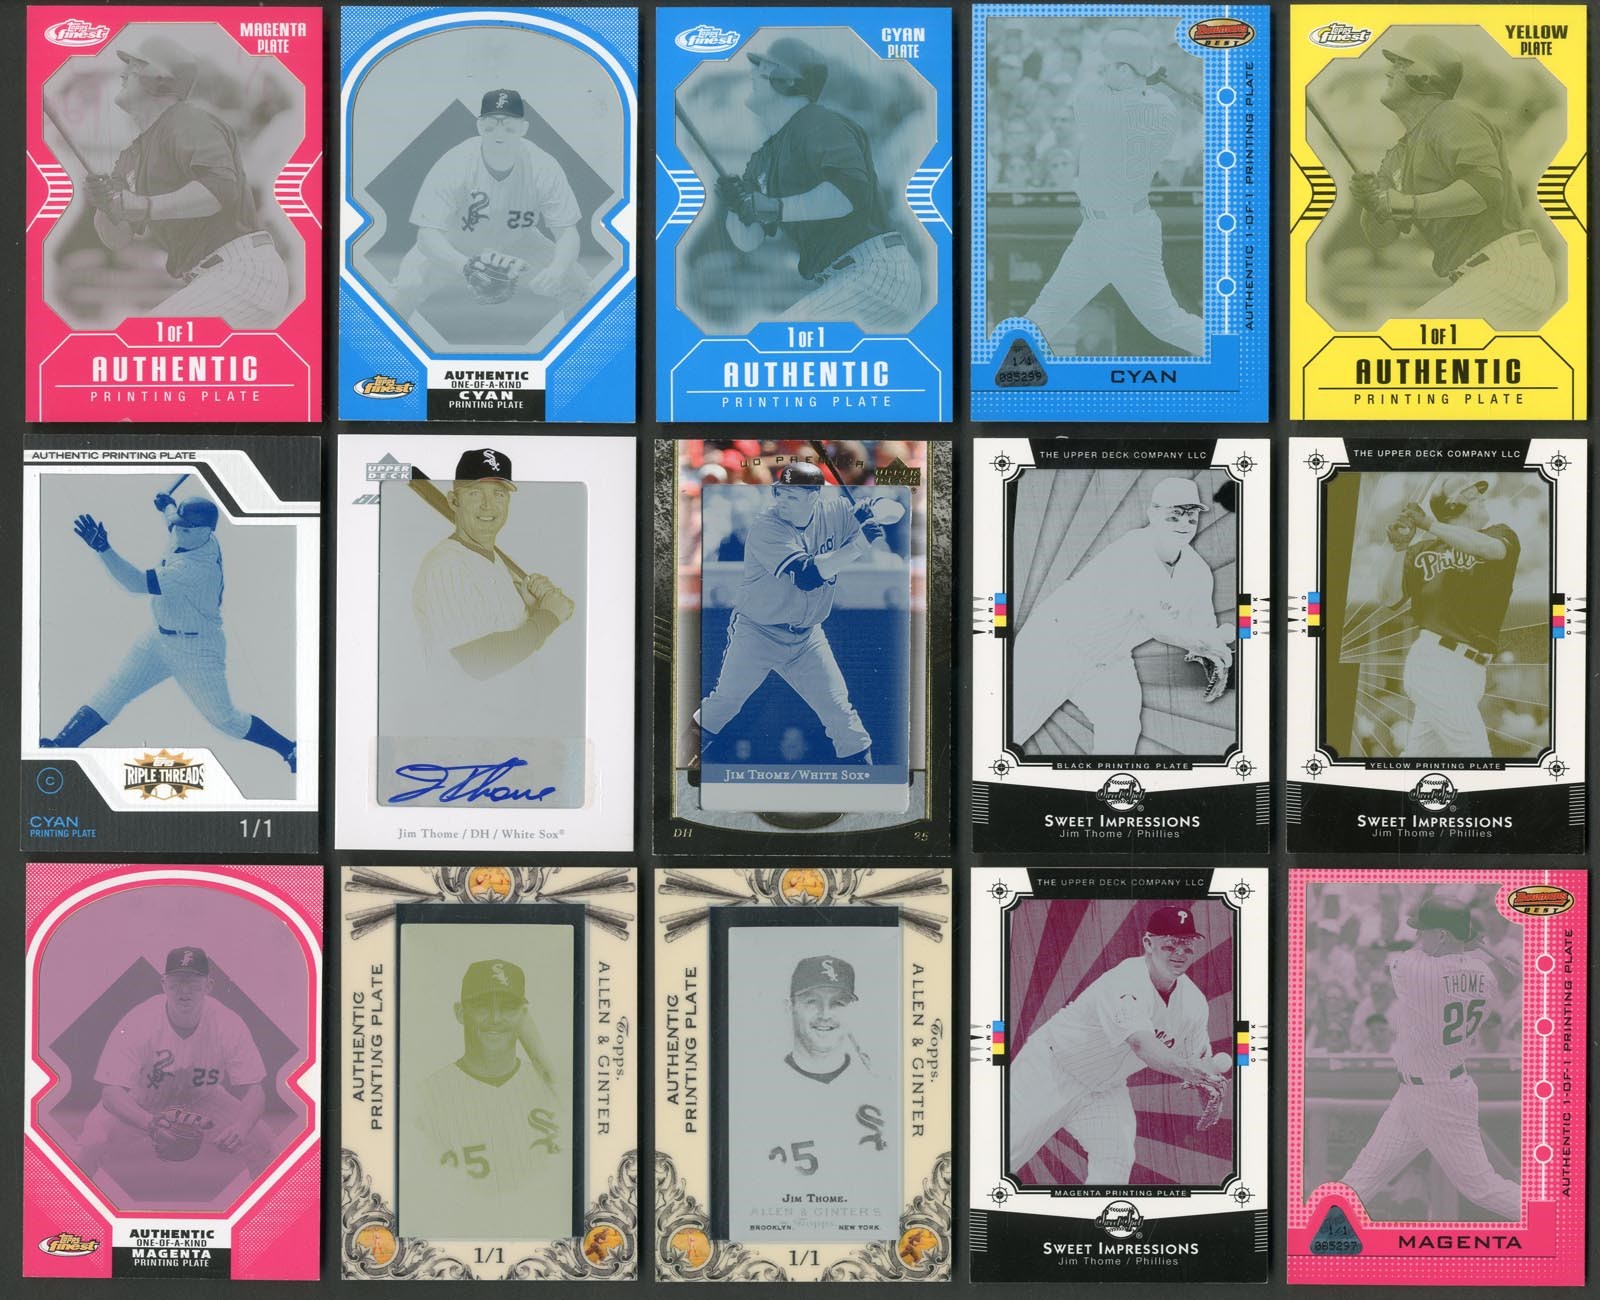 Massive Jim Thome 1 of 1 Printing Plate Collection (150+)